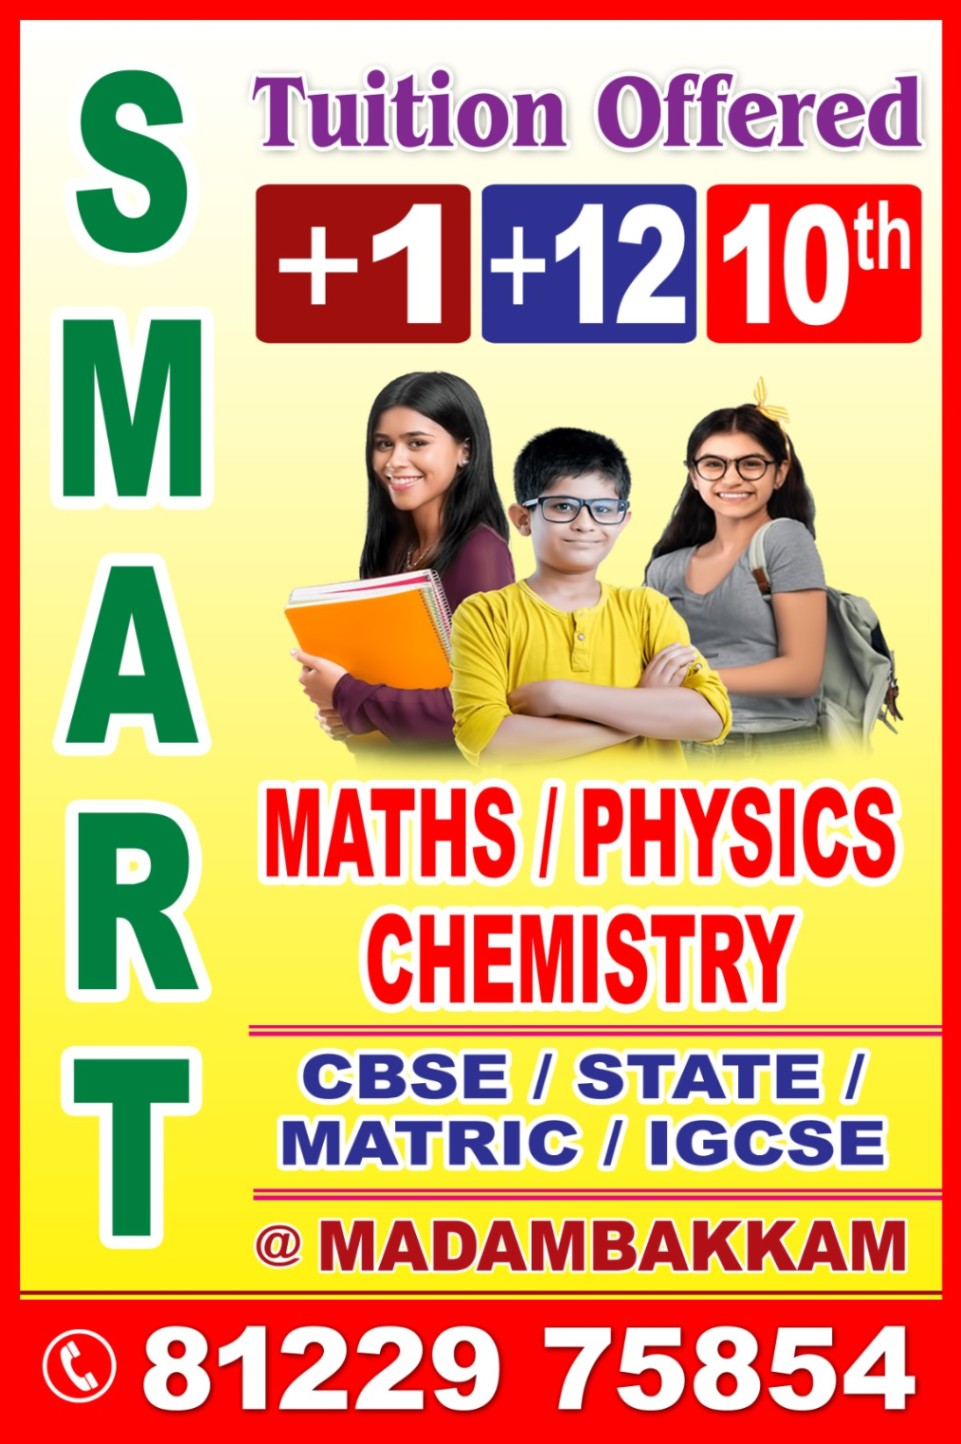 Chemistry, Class 11th/ 12th Tuition, Mathematics, Physics, Class 9th/ 10th Tuition; Exp: More than 15 year